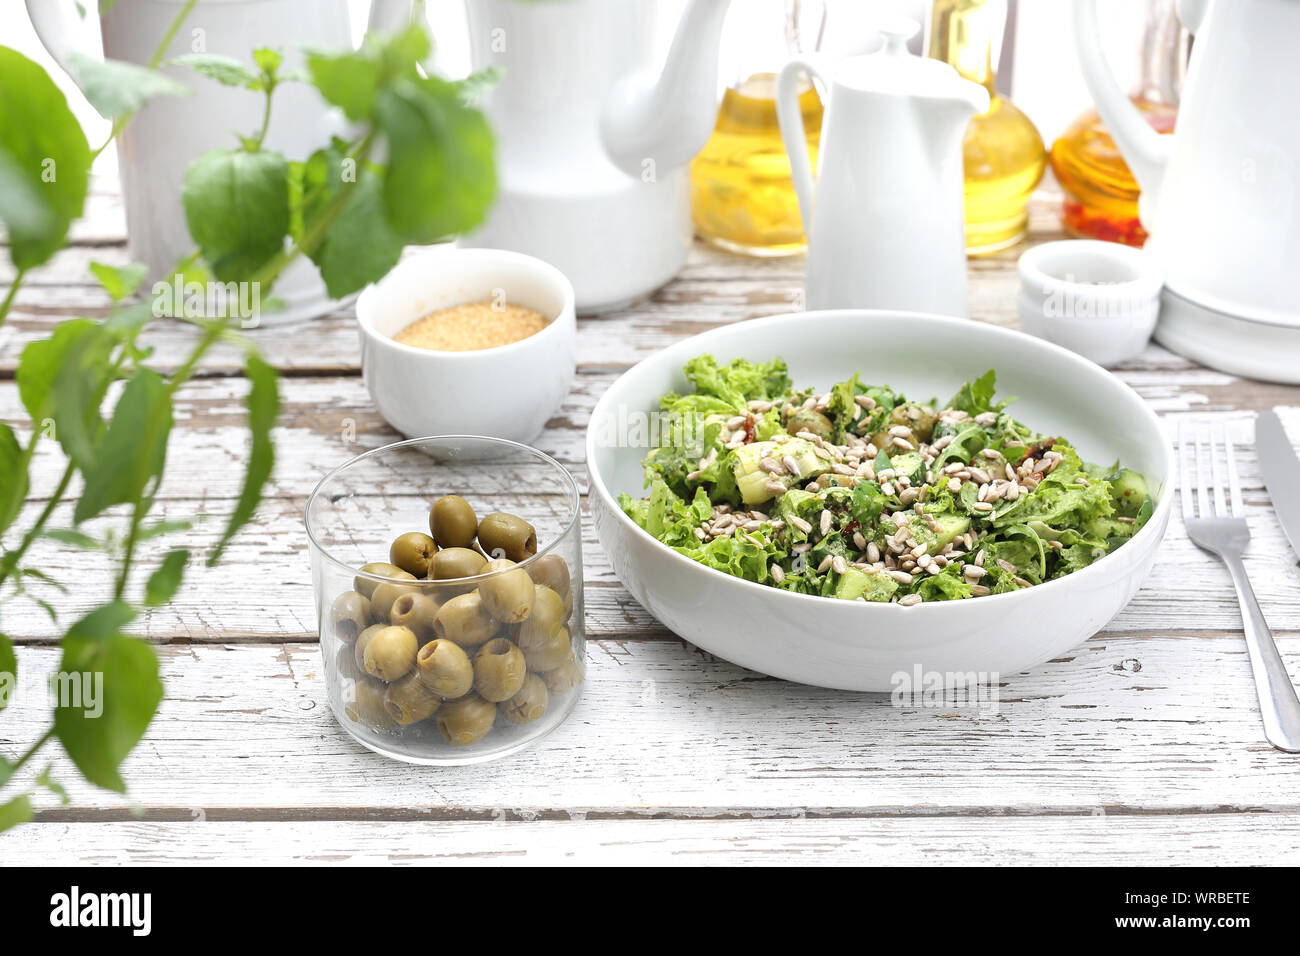 Fresh salad with olives, sun-dried tomatoes, sunflower seeds served with a sauce based on oil and herbs. Stock Photo